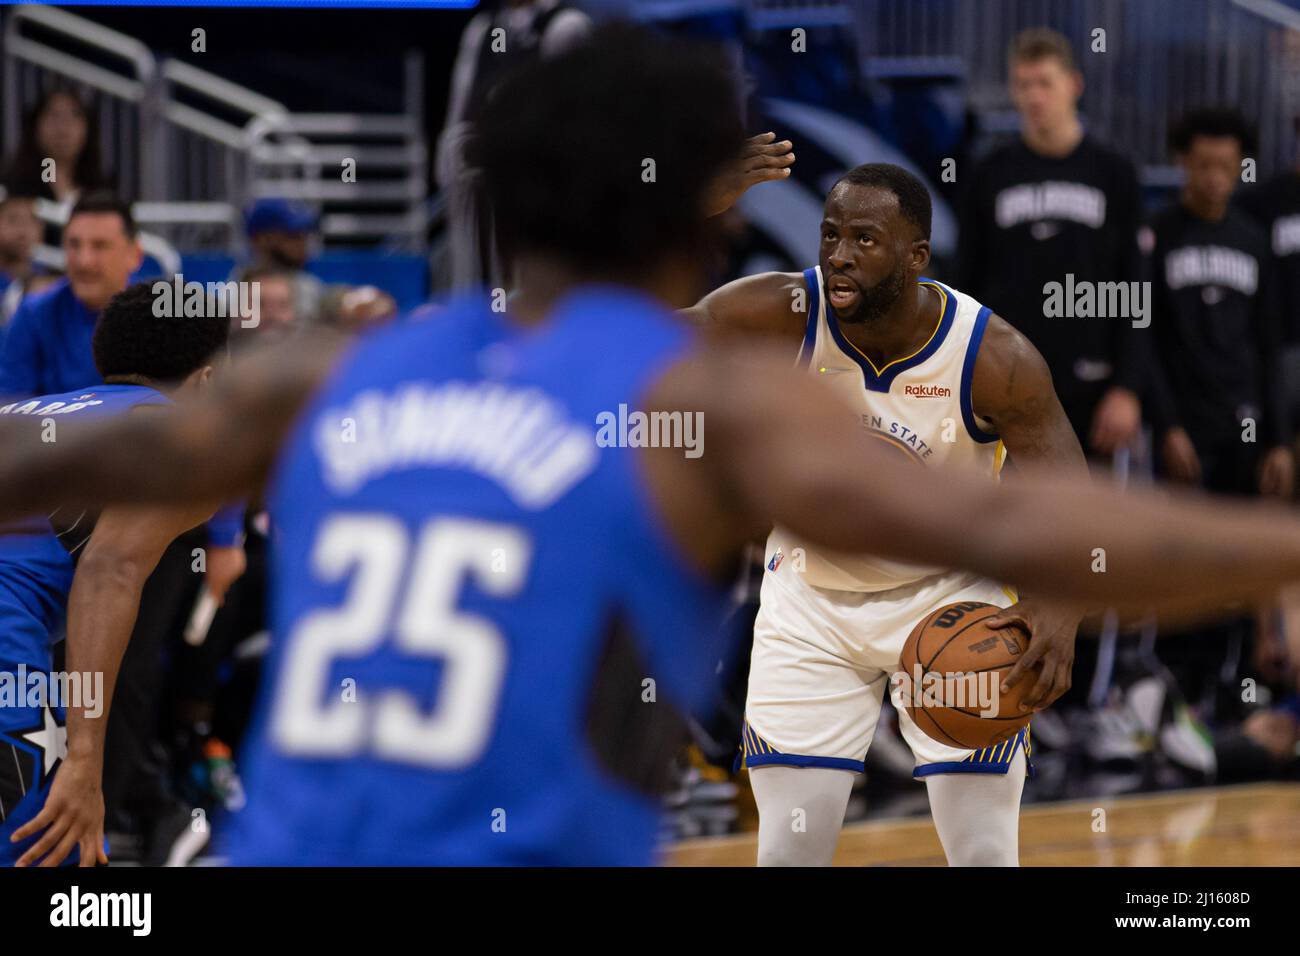 Orlando, United States. 22nd Mar, 2022. Draymond Green (23 Golden State  Warriors) instructs his team during the National Basketball Association  game between Orlando Magic and Golden State Warriors at Amway Center in